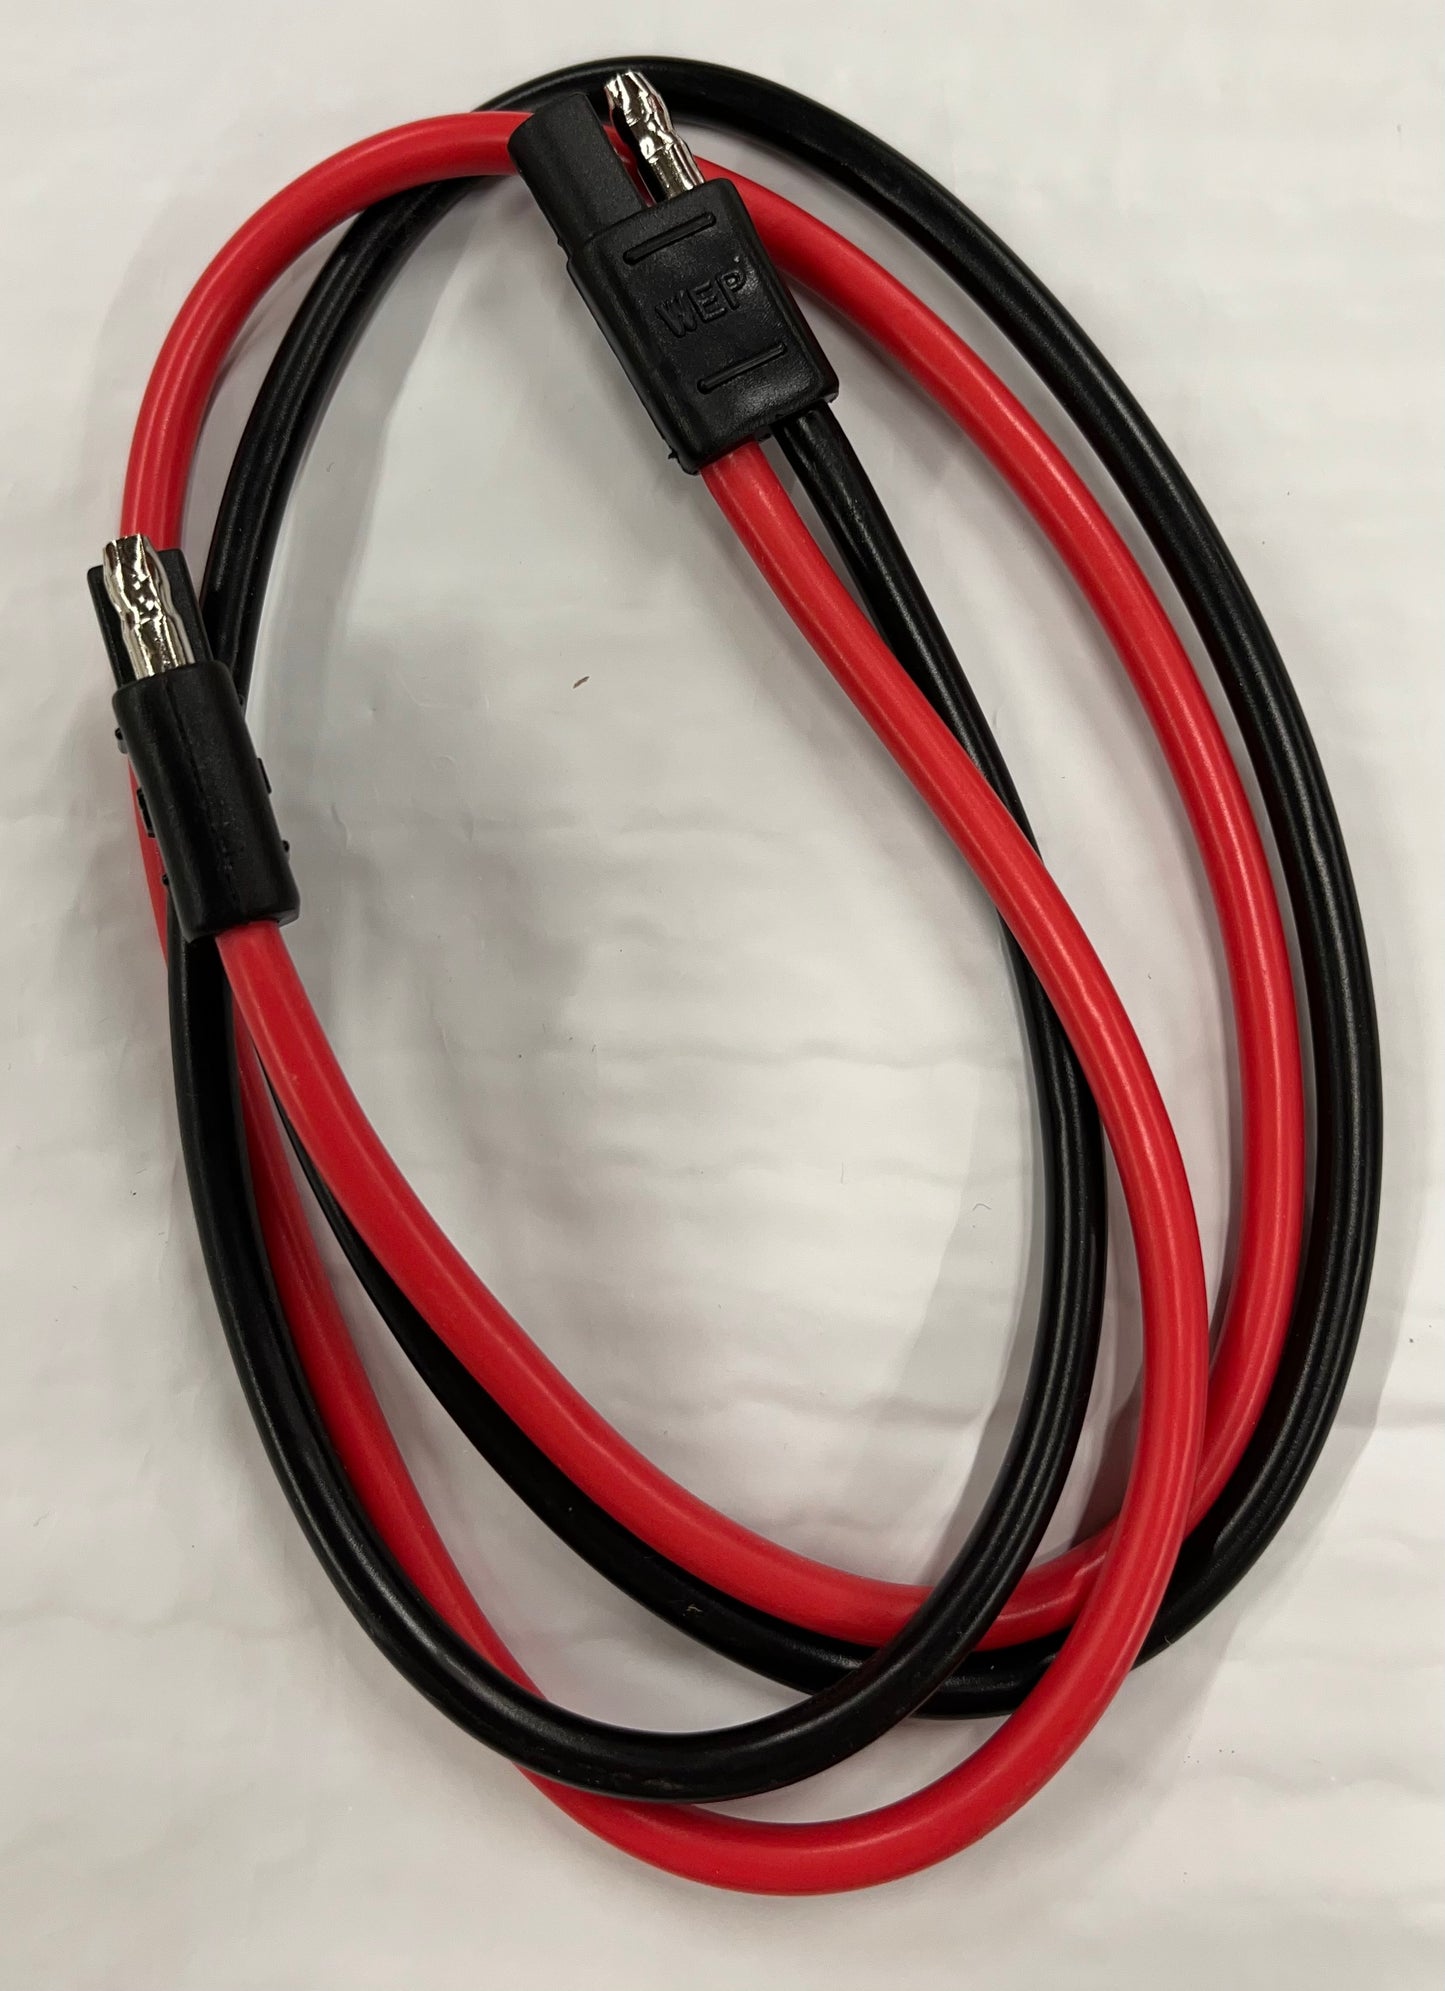 2 foot 2-pin 10 GA red/black power wire